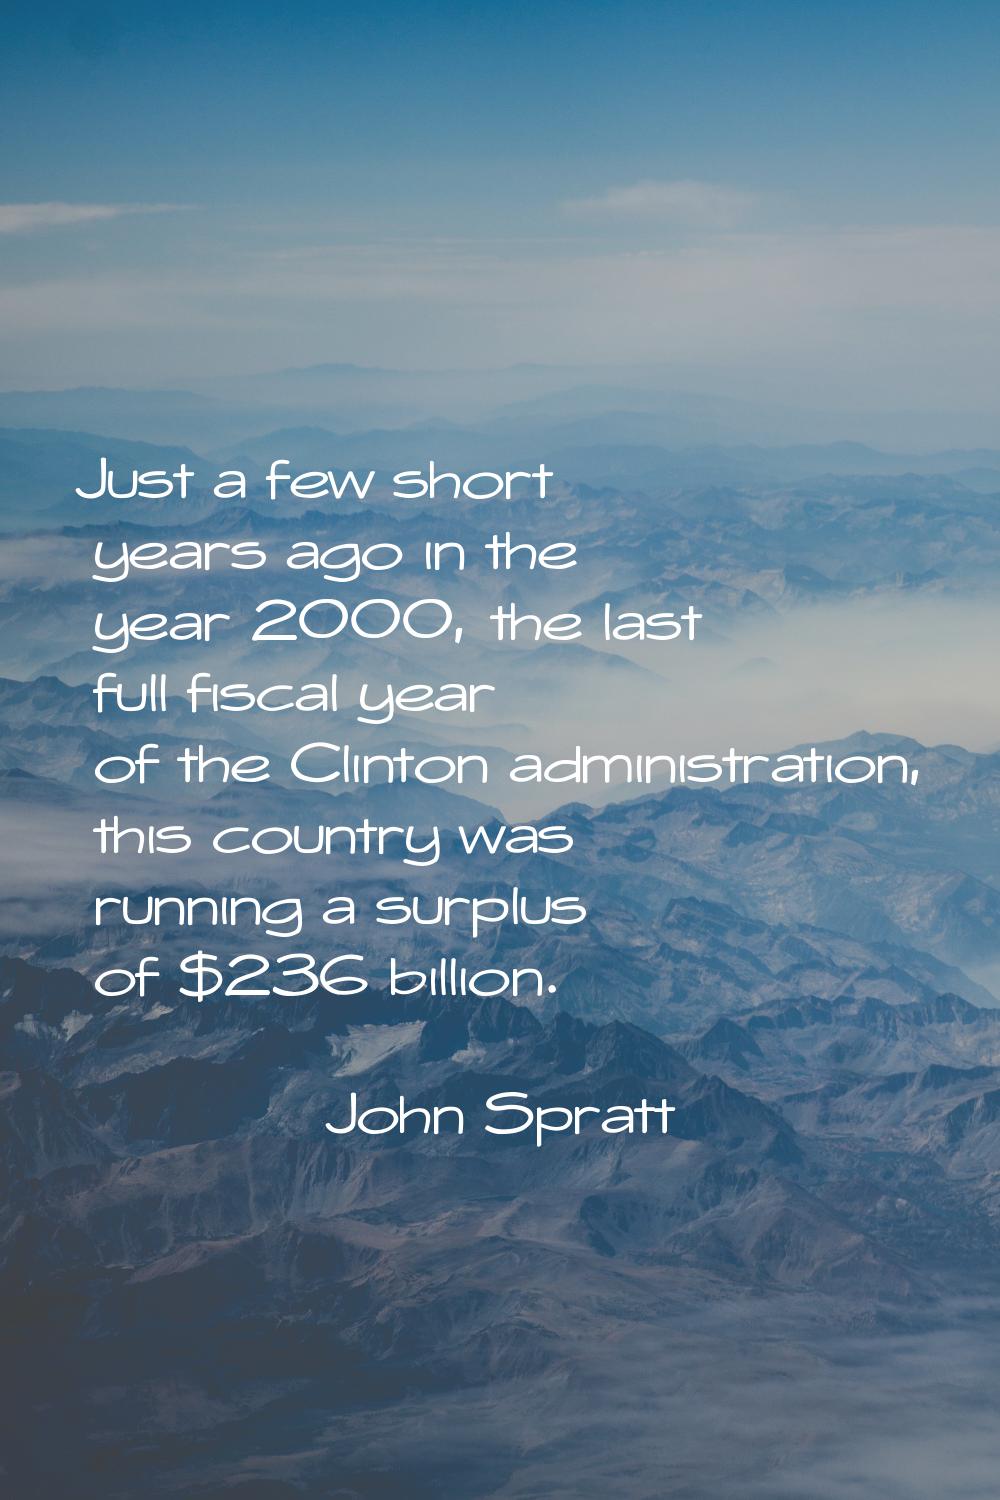 Just a few short years ago in the year 2000, the last full fiscal year of the Clinton administratio